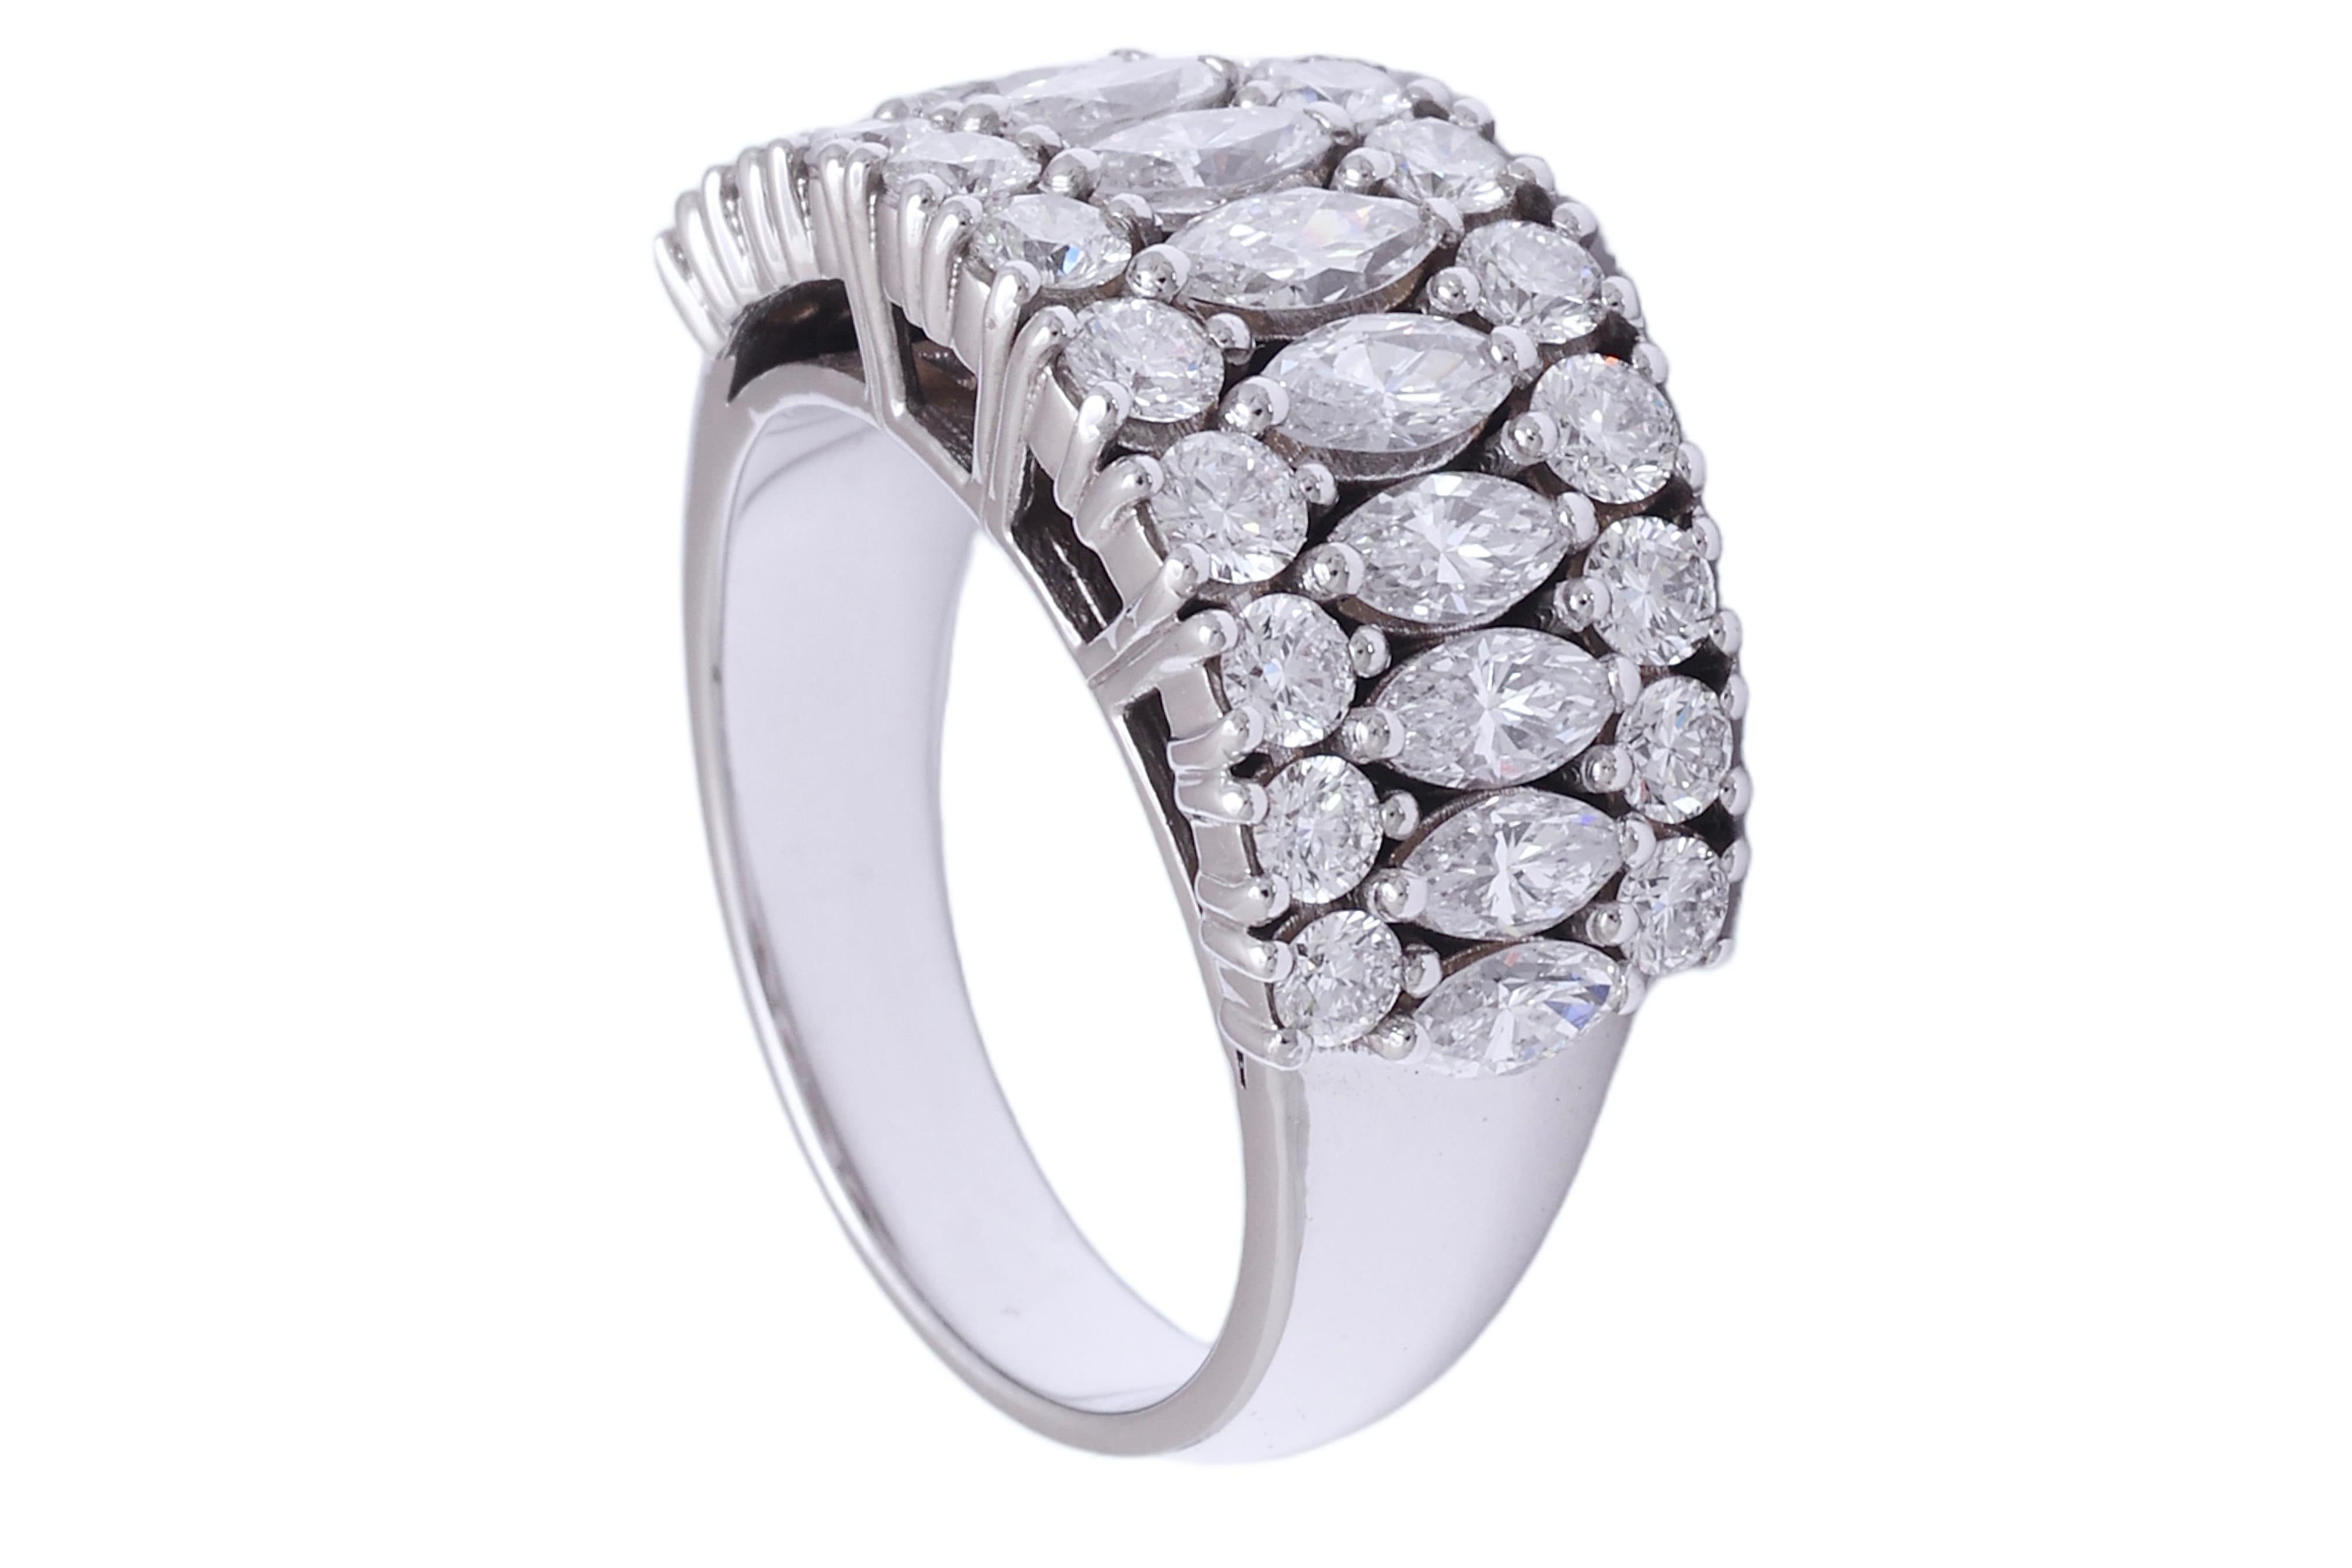 18 kt. Elegant & Luxurious Wedding Ring With 1.18 ct. Brilliant cut & 1.43 ct. Marquise Cut Diamonds, Total 2.61 Ct Diamonds

Diamonds: Brilliant cut diamonds together approx. 1.18 ct. Marquise cut diamonds together approx. 1.43 ct.

Material: 18